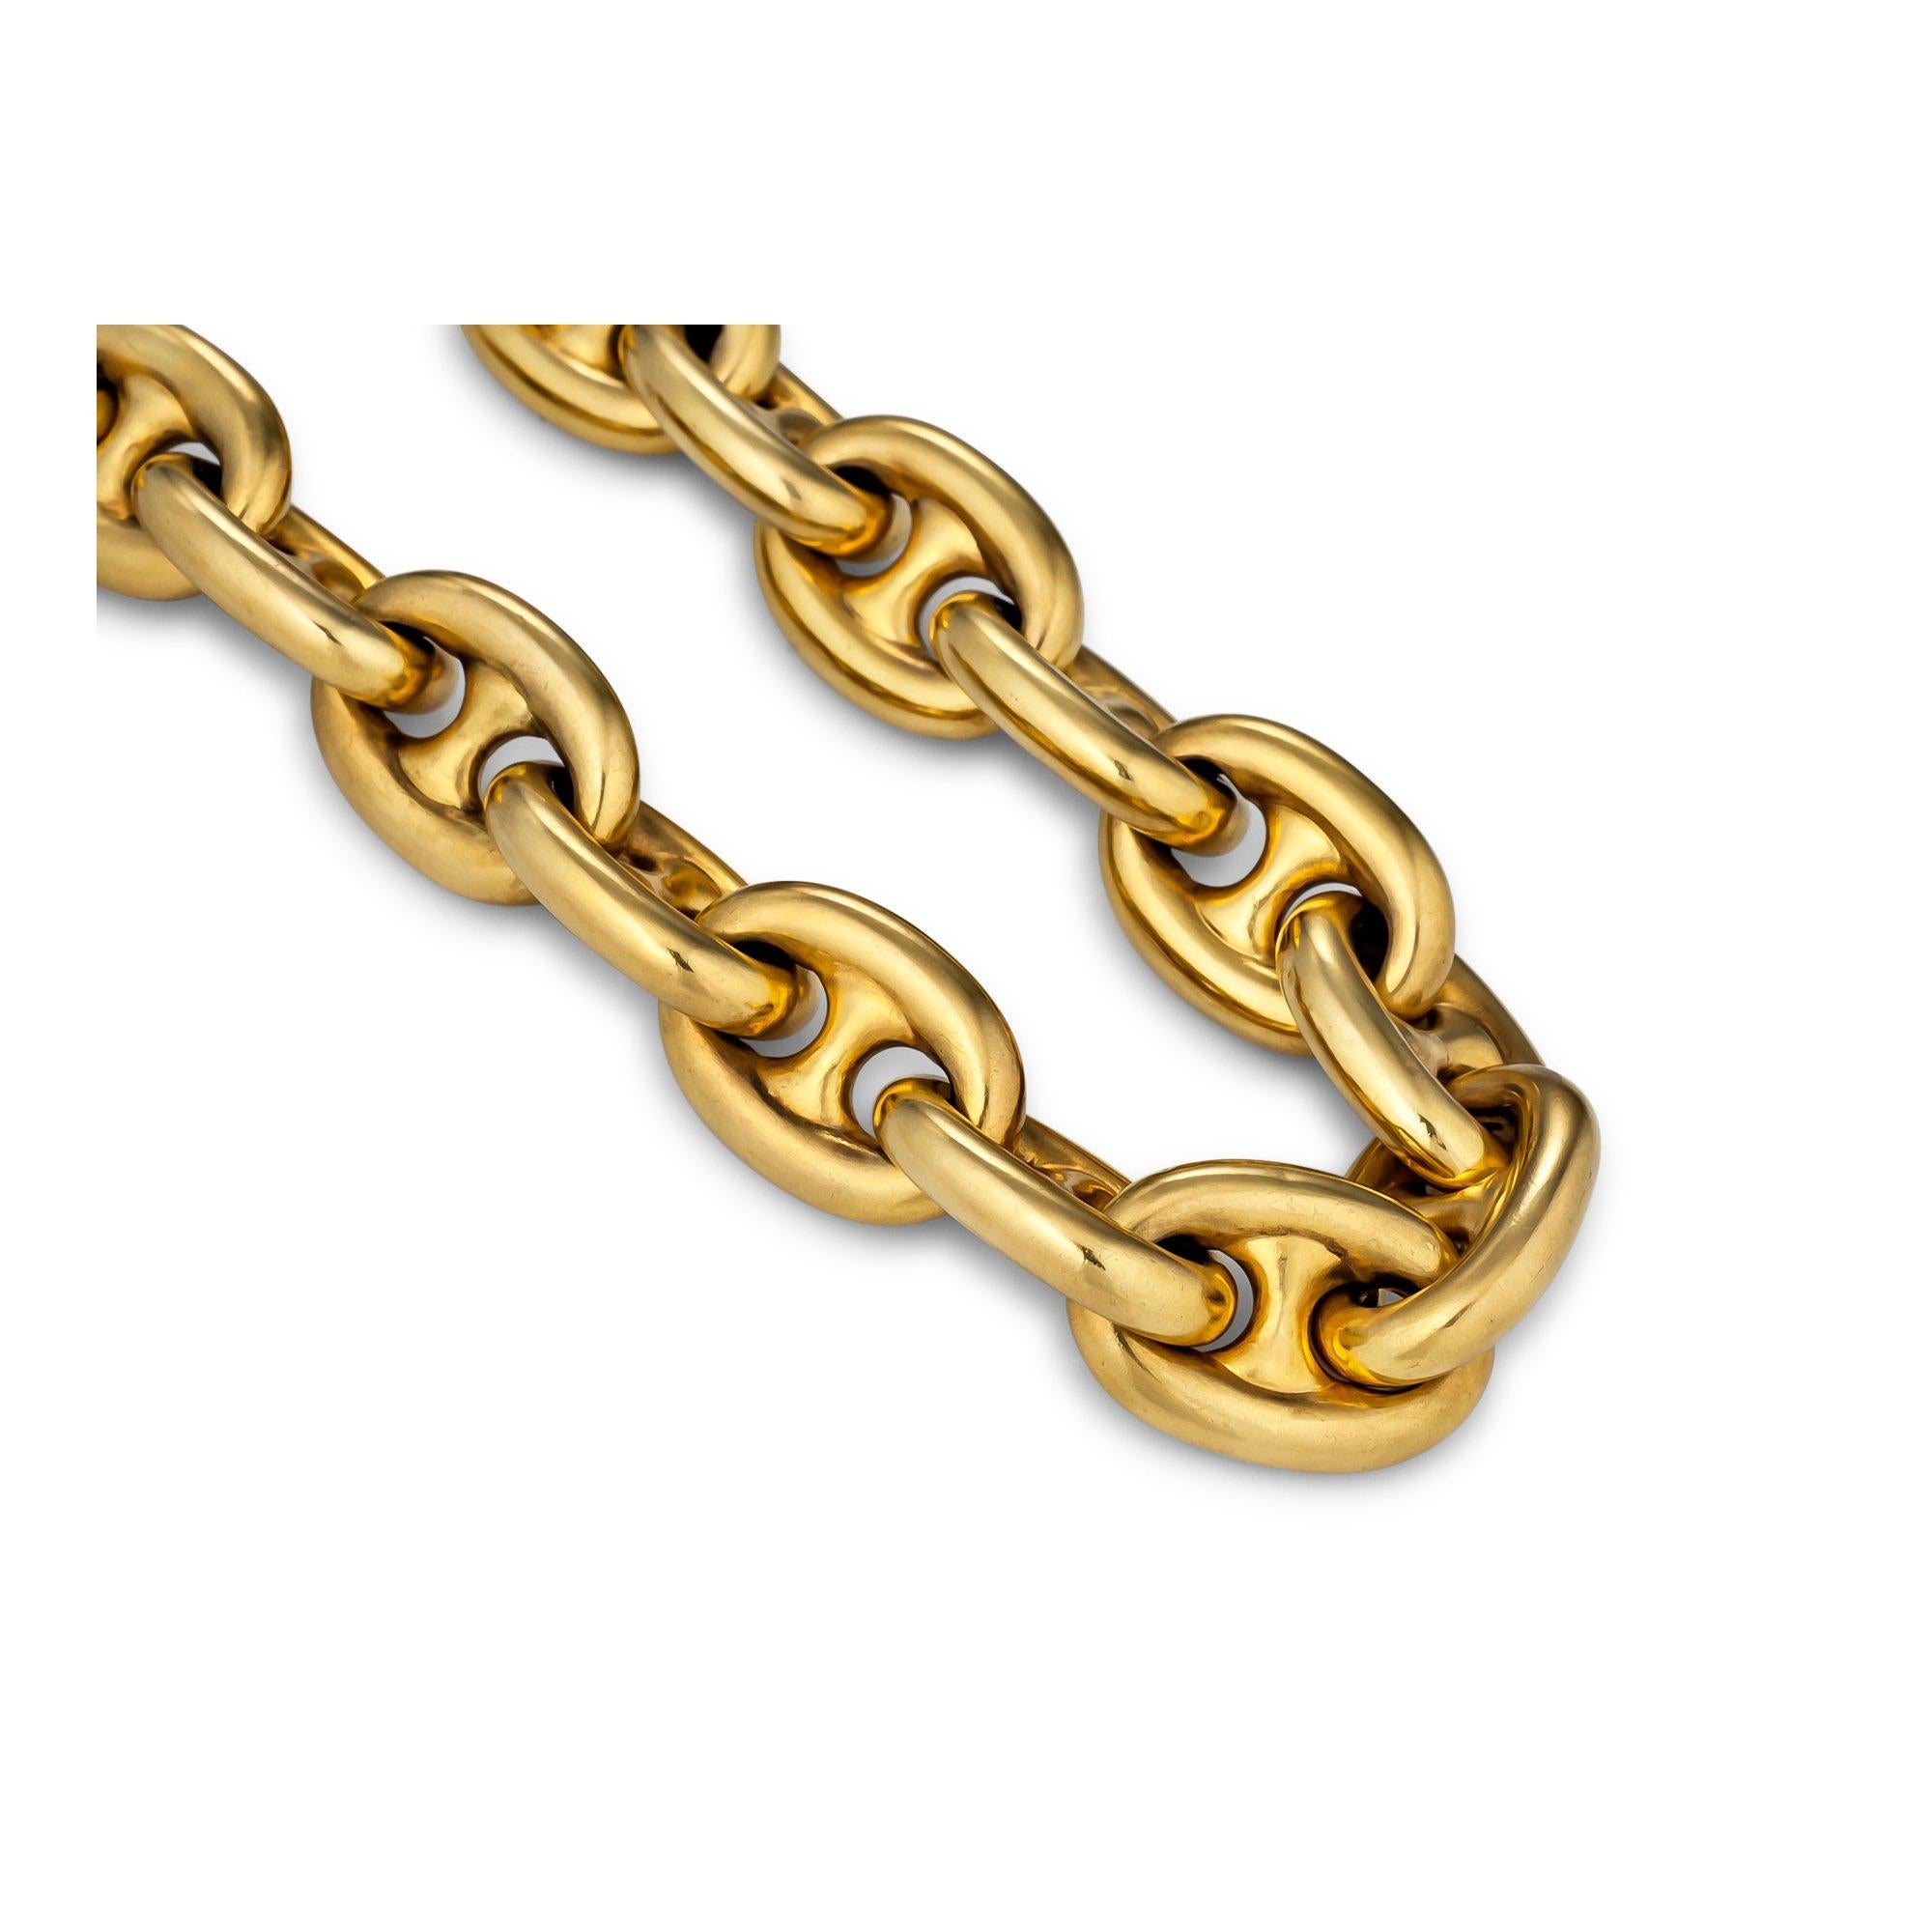 You will be forever linked in with this handmade Victorian 18 karat yellow gold bracelet.  With a warm honeyed patina, the 15 nautical links form a bracelet that stands alone or looks chic paired with others.  Circa 1885.  8 1/2